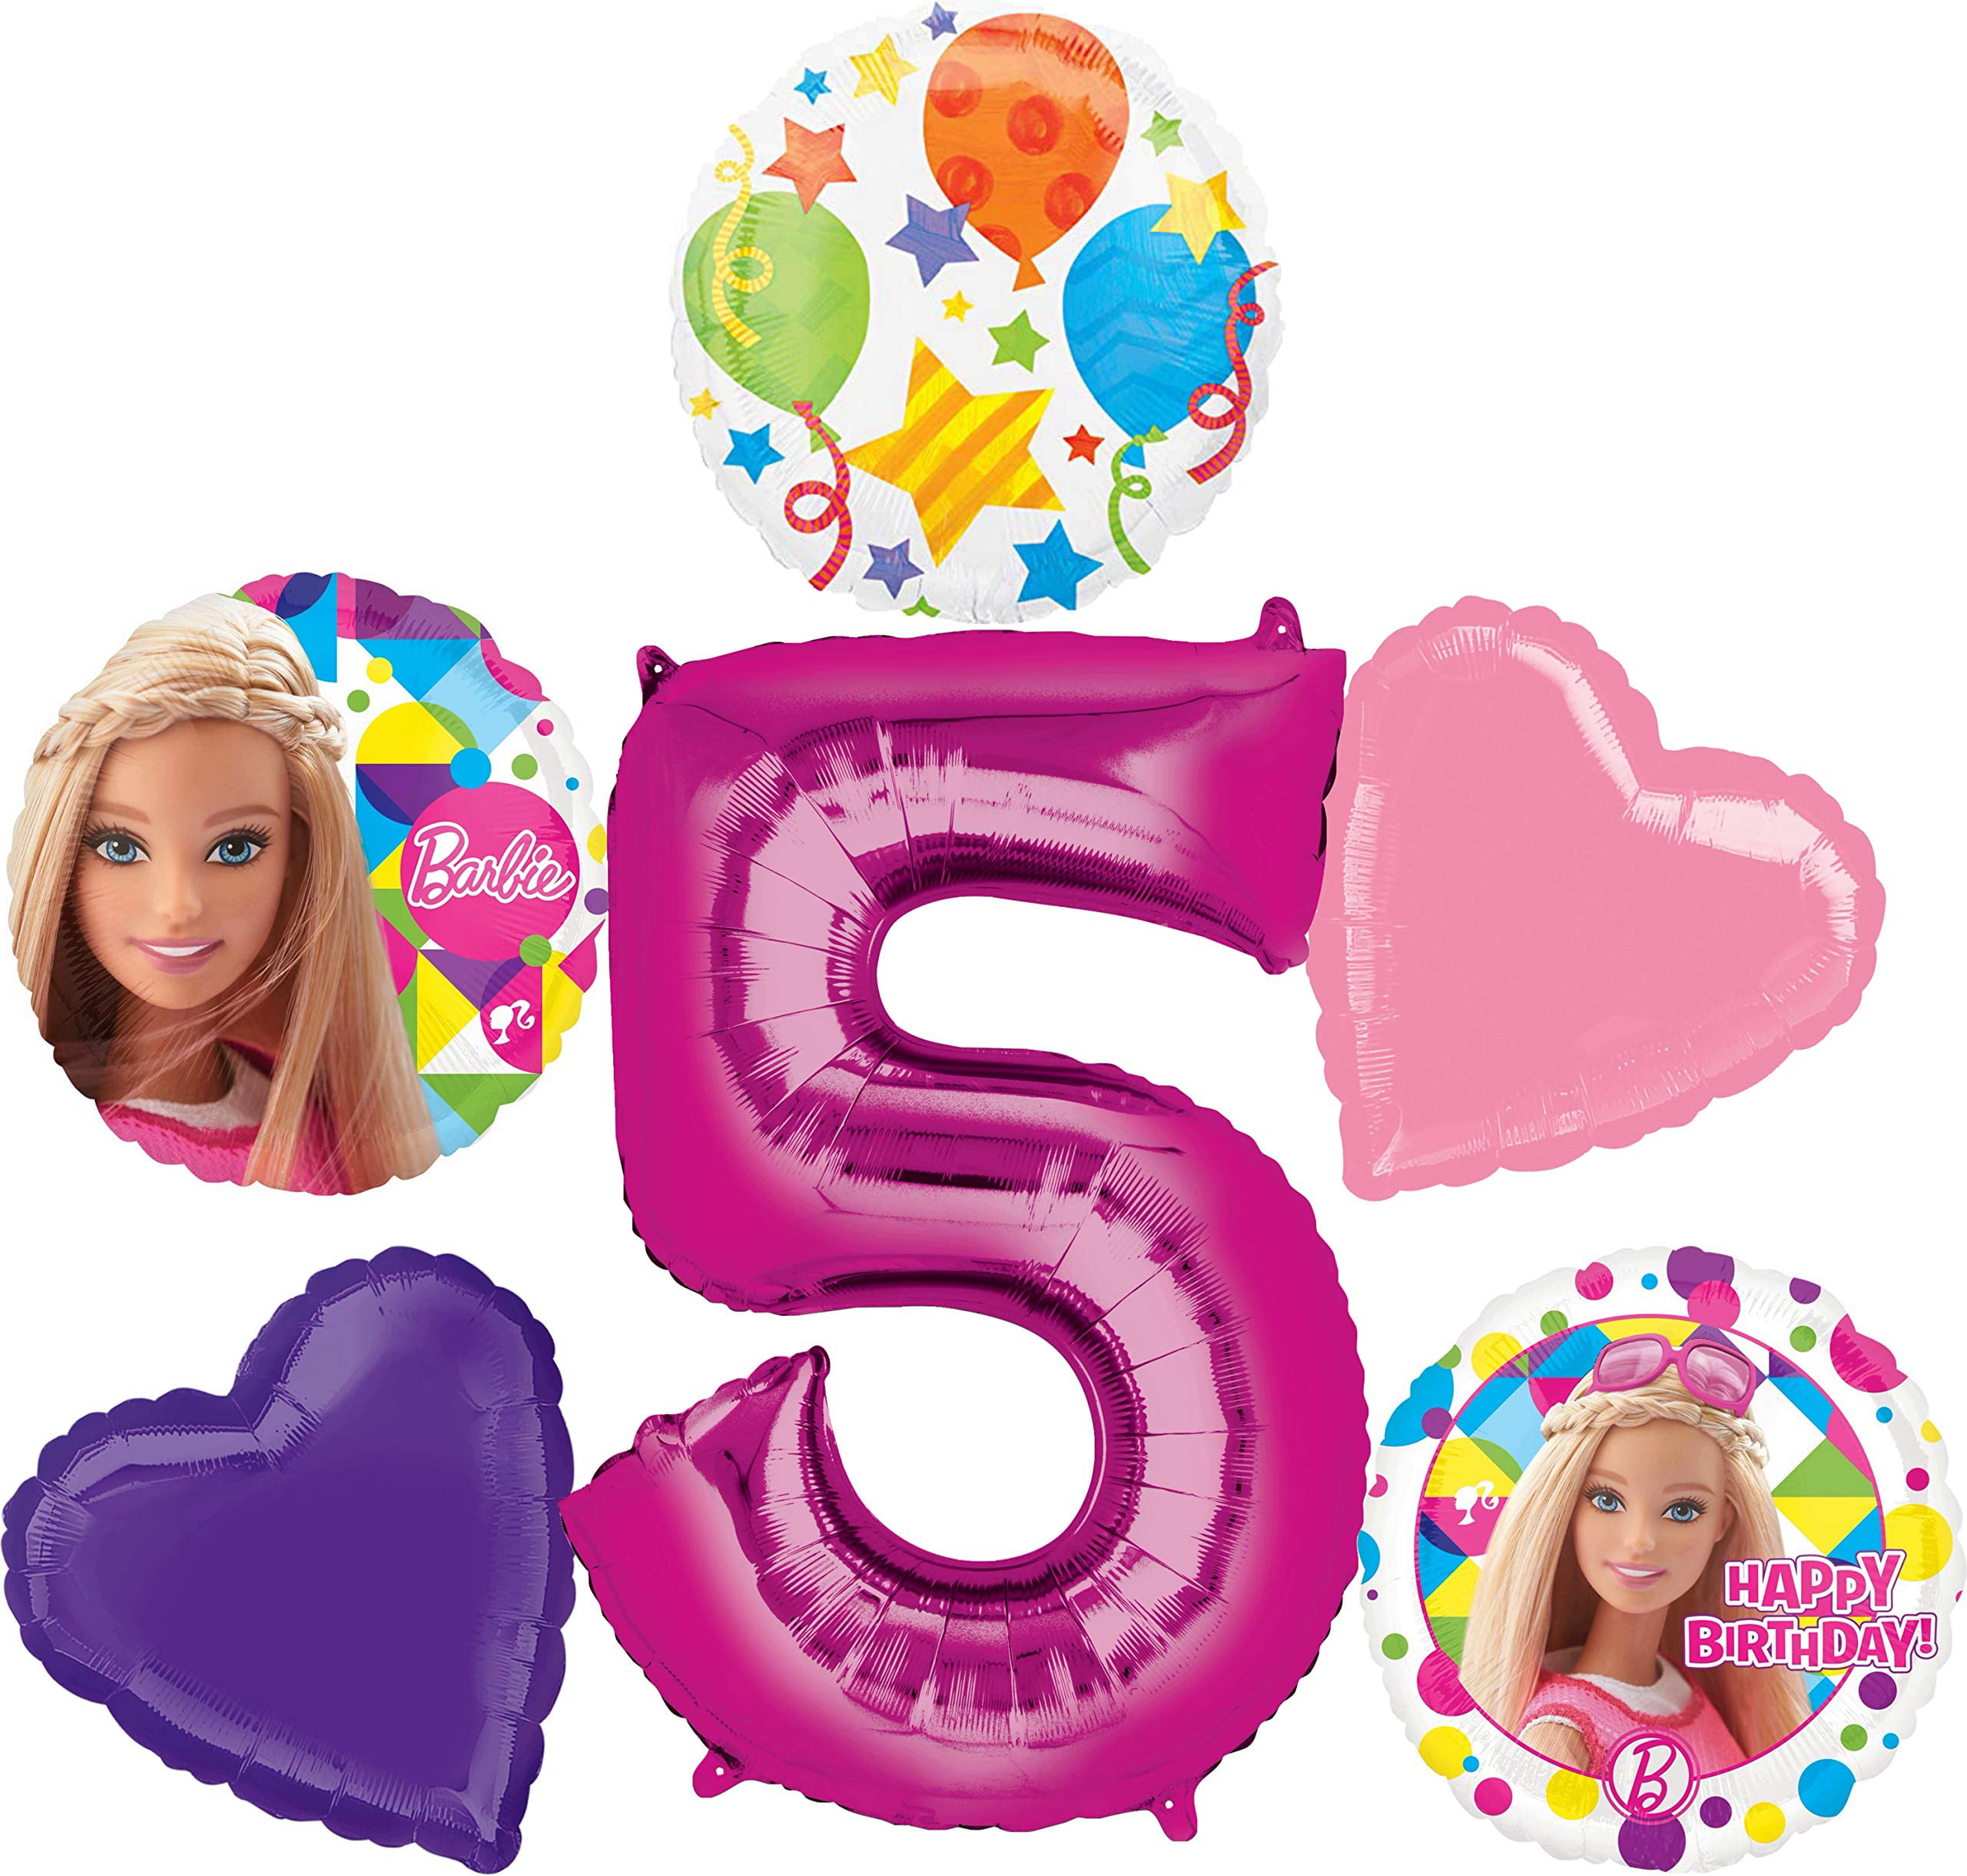 Belle Birthday Mylar Bouquet Balloons Party Decoration Set of 5 